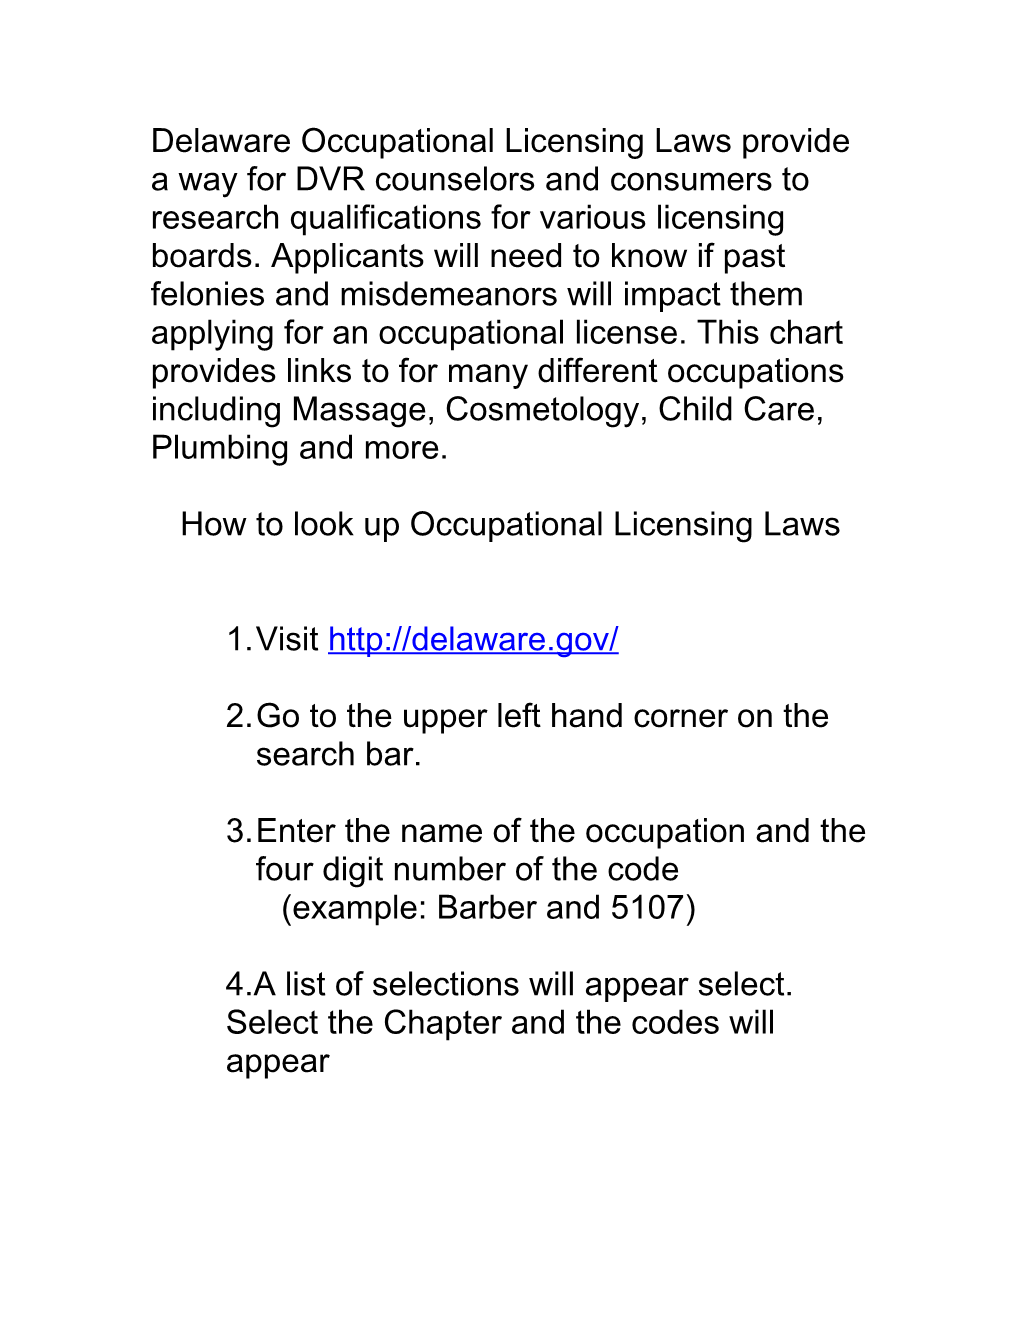 Delaware Occupational Licensing Laws Provide a Way for DVR Counselors and Consumers To